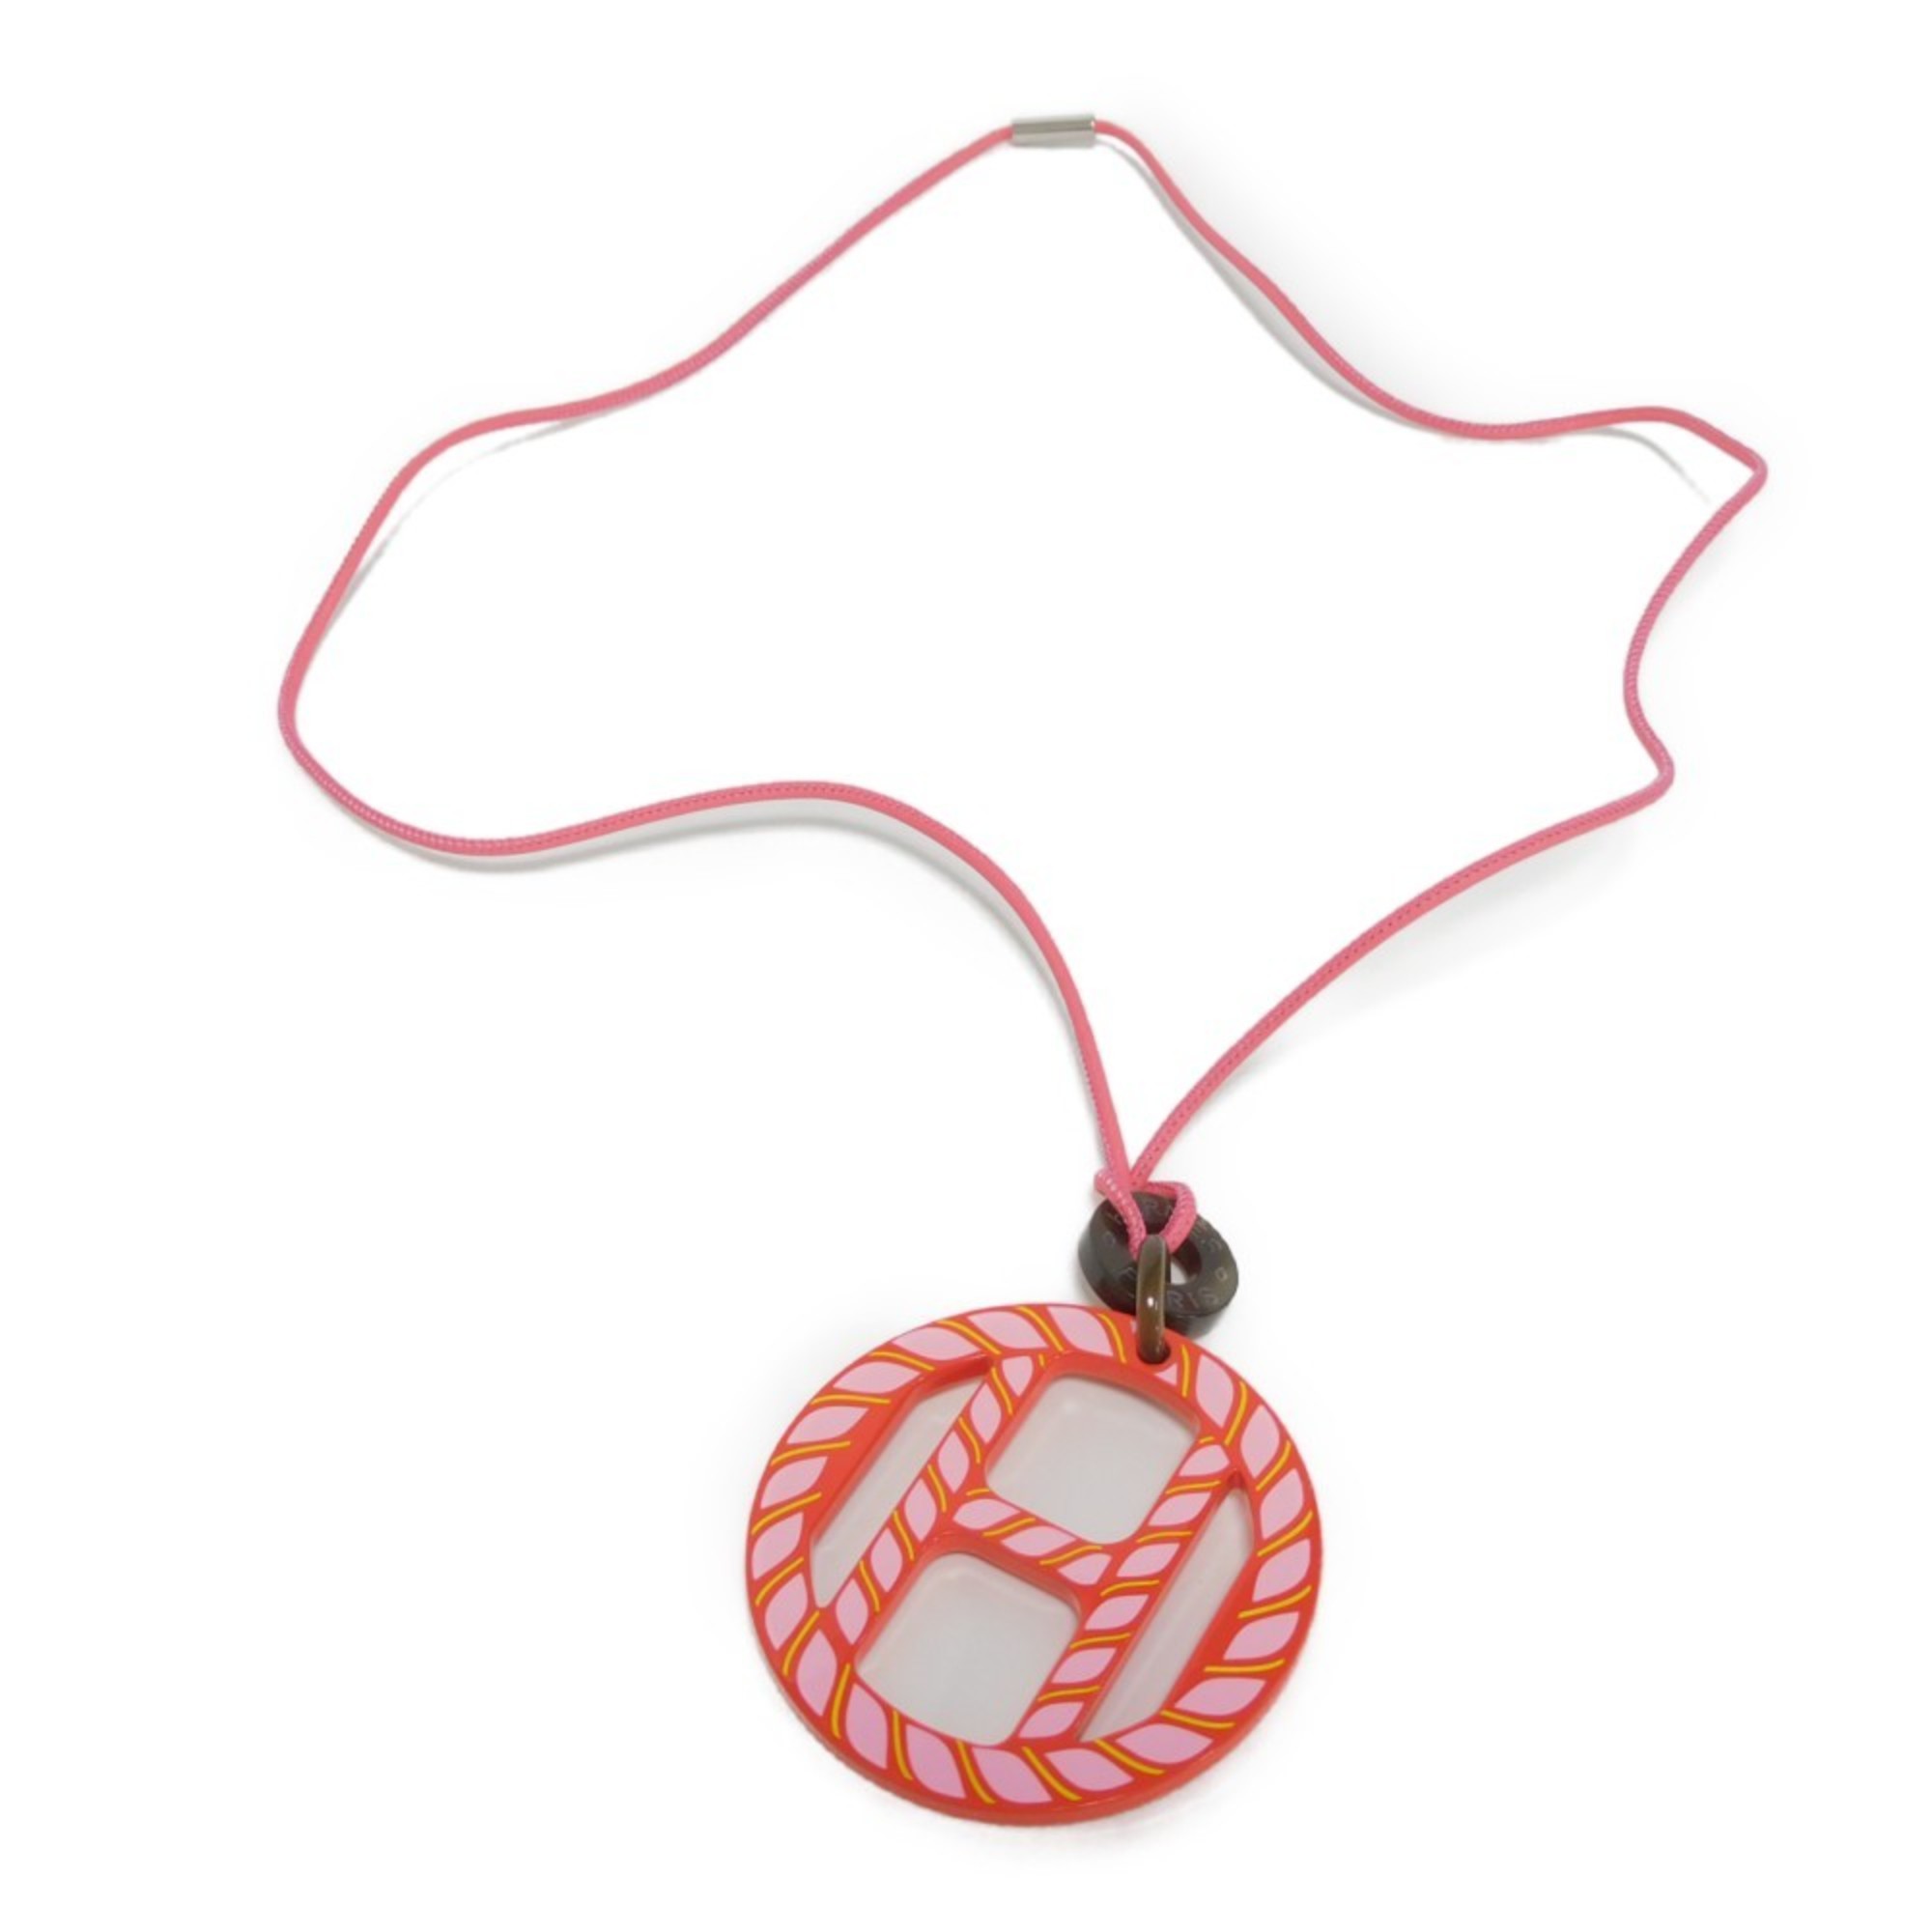 Hermes HERMES Necklace H Equipe Nautic Mark Pendant Pink Red Rope Buffalo Horn Lacquer Tropic Women's